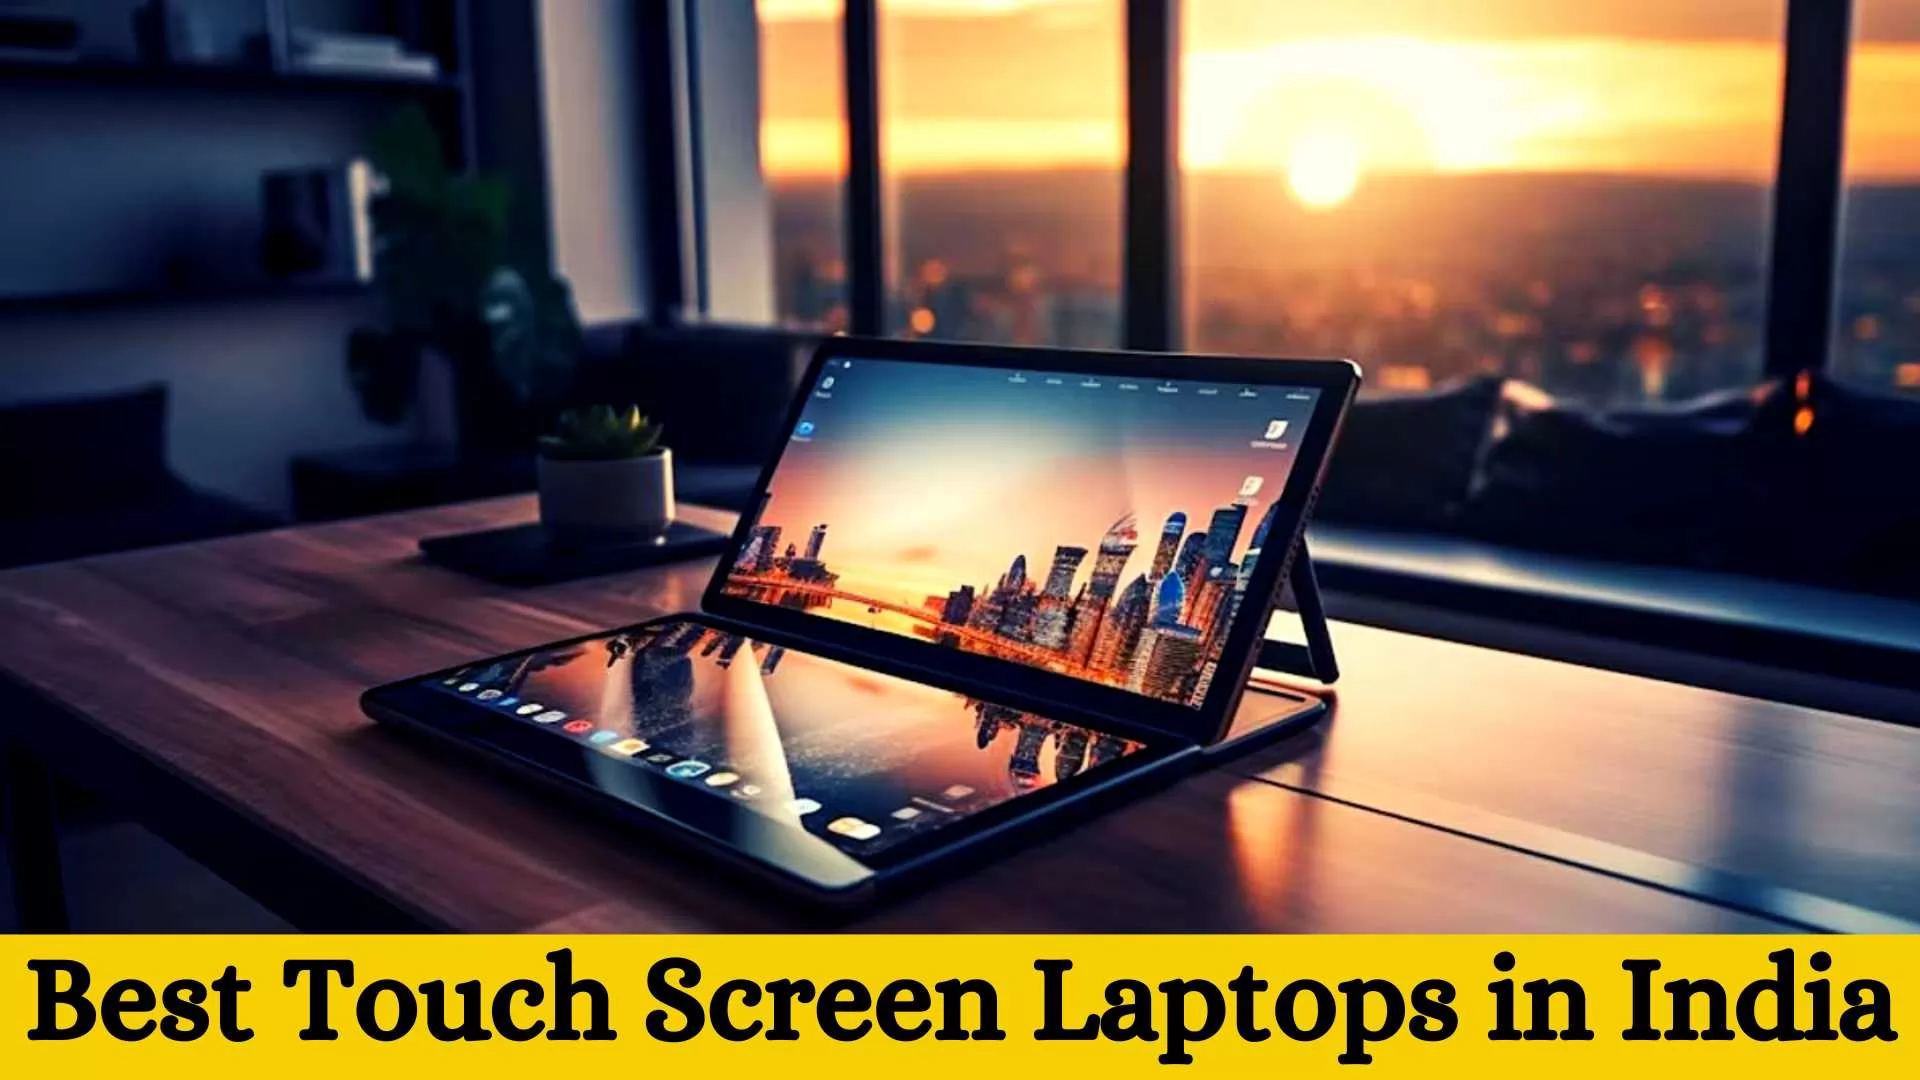 Best Touch Screen Laptops in India